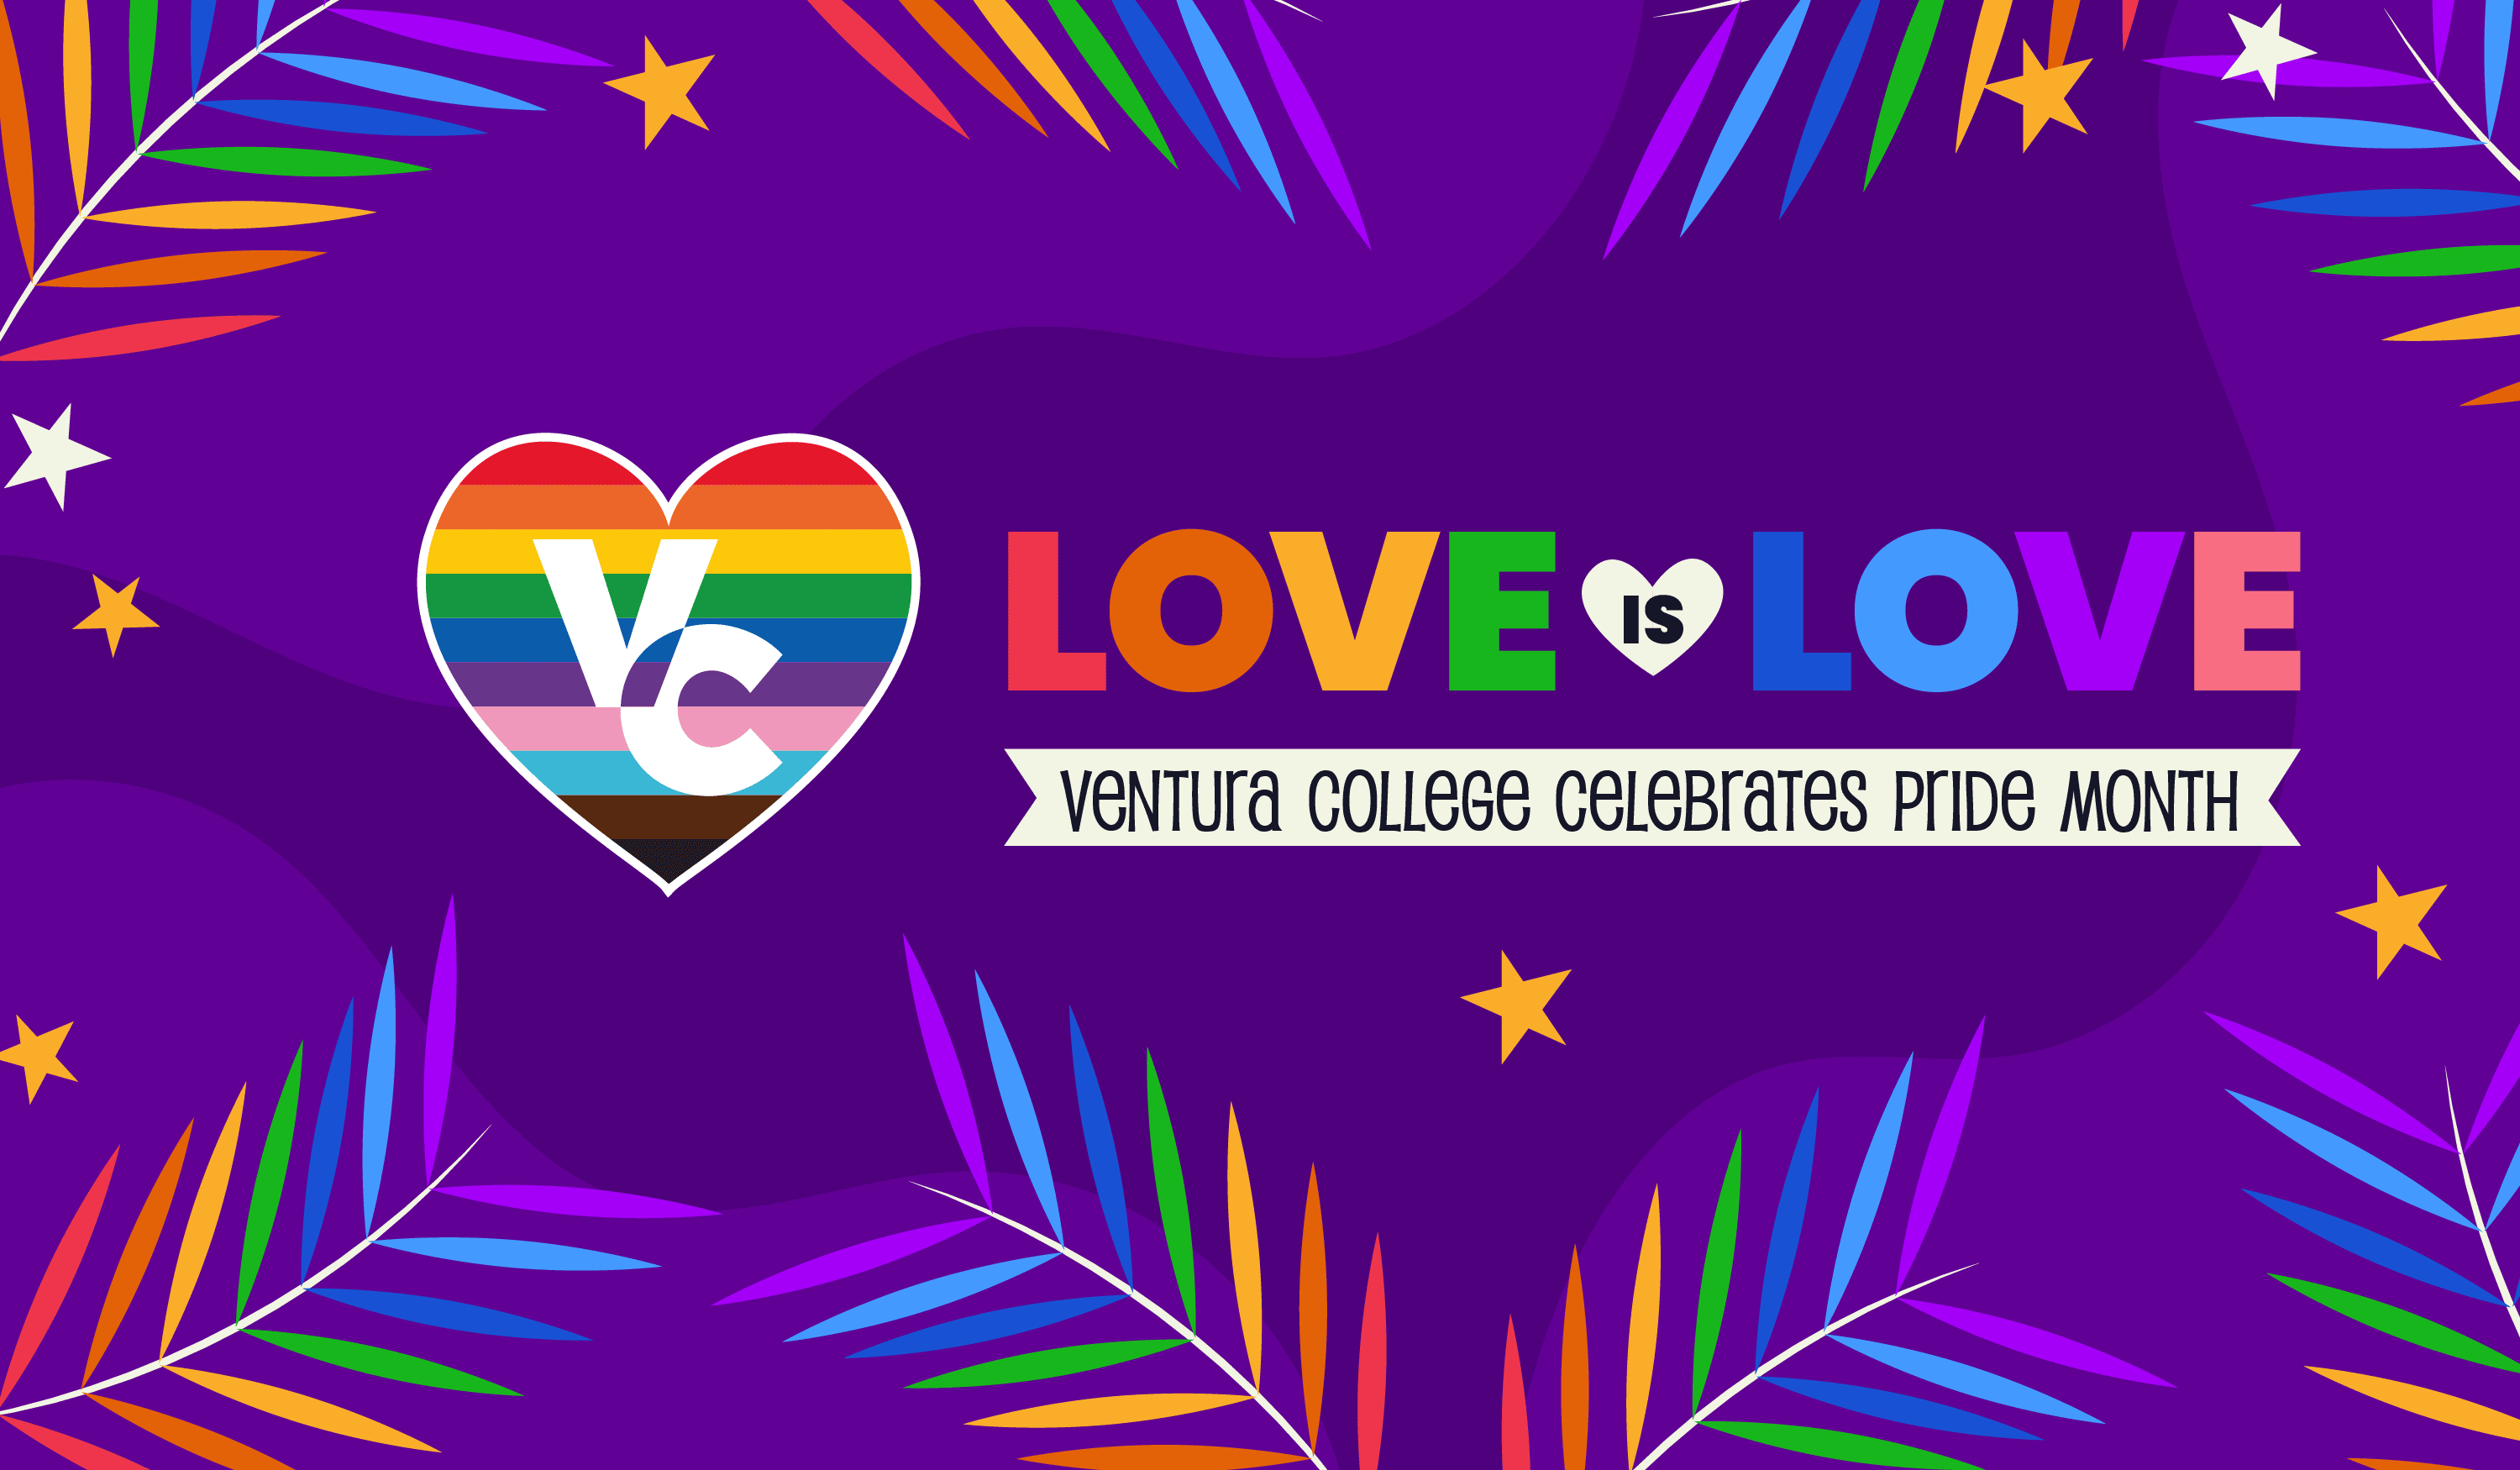 Purple background with rainbow feathers. A rainbow heart with the VC initials in it. Text that reads: Love is Love Ventura College Celebrates Pride Month.